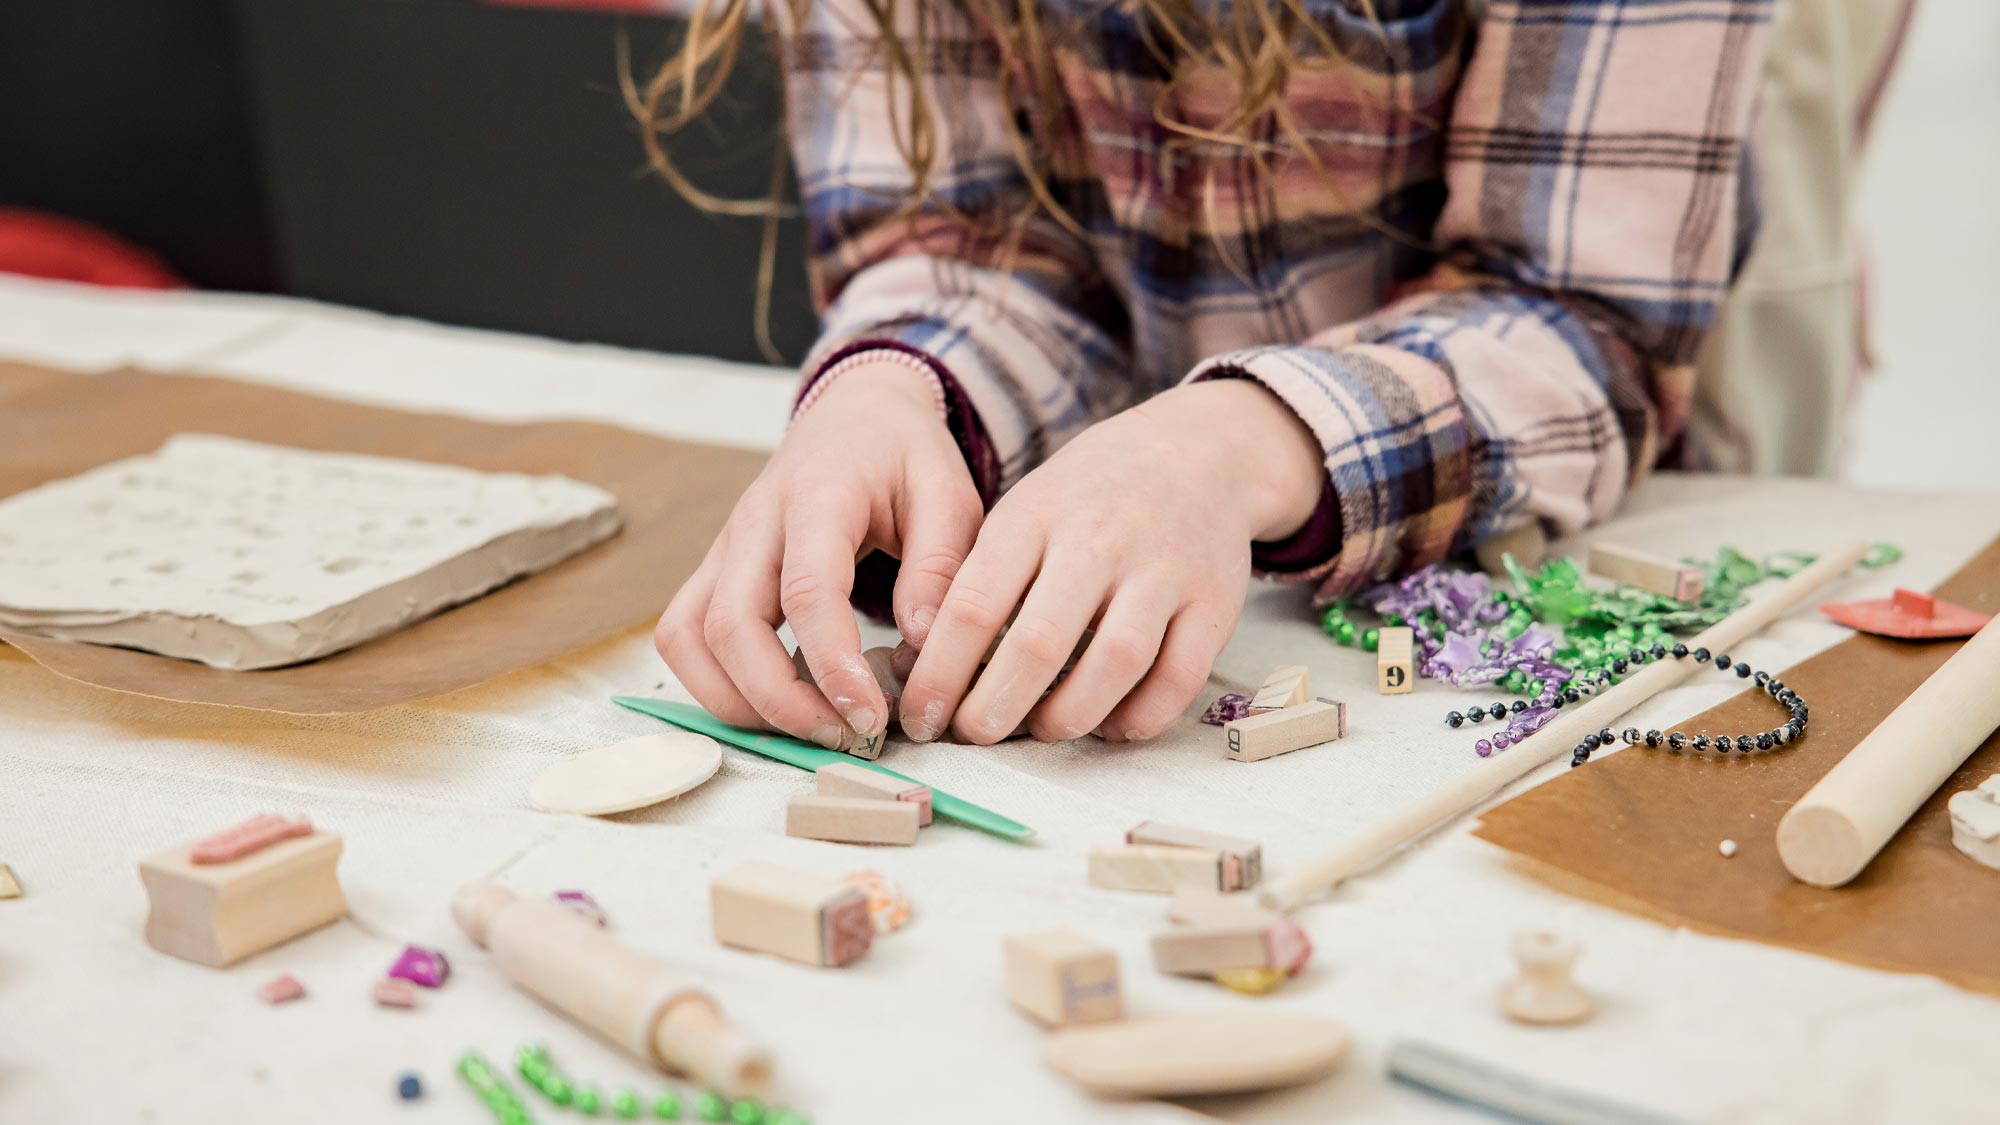 Young girl creating small sculptures with clay